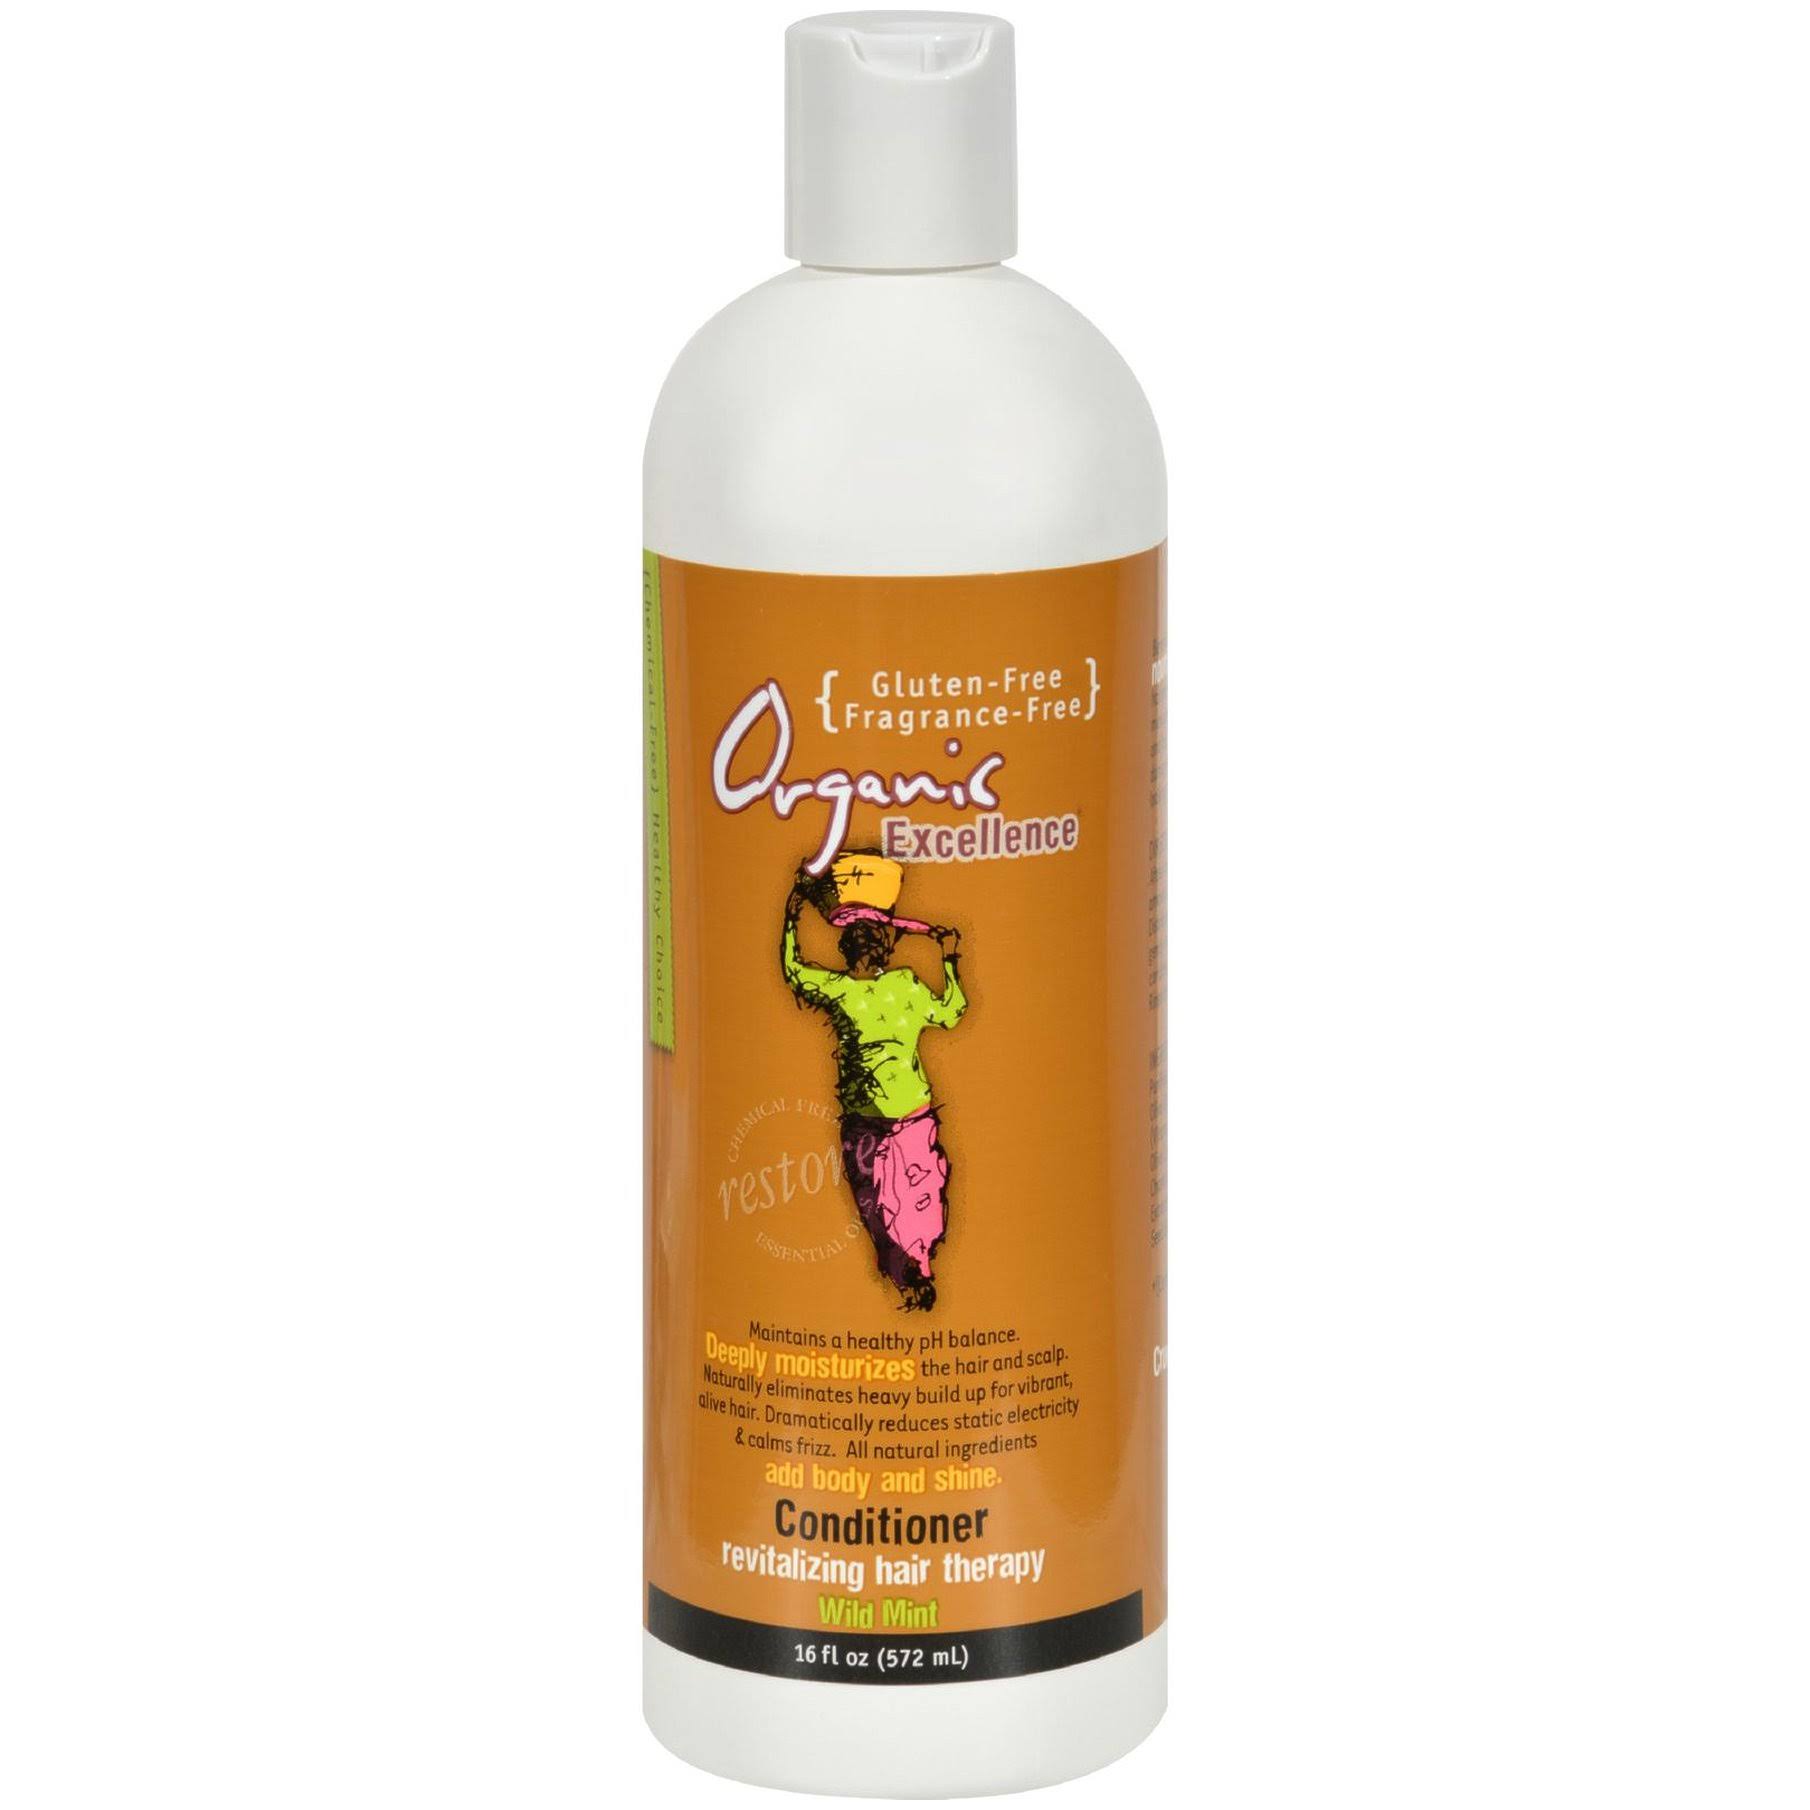 Organic Excellence - Wild Mint Conditioner - 16 oz